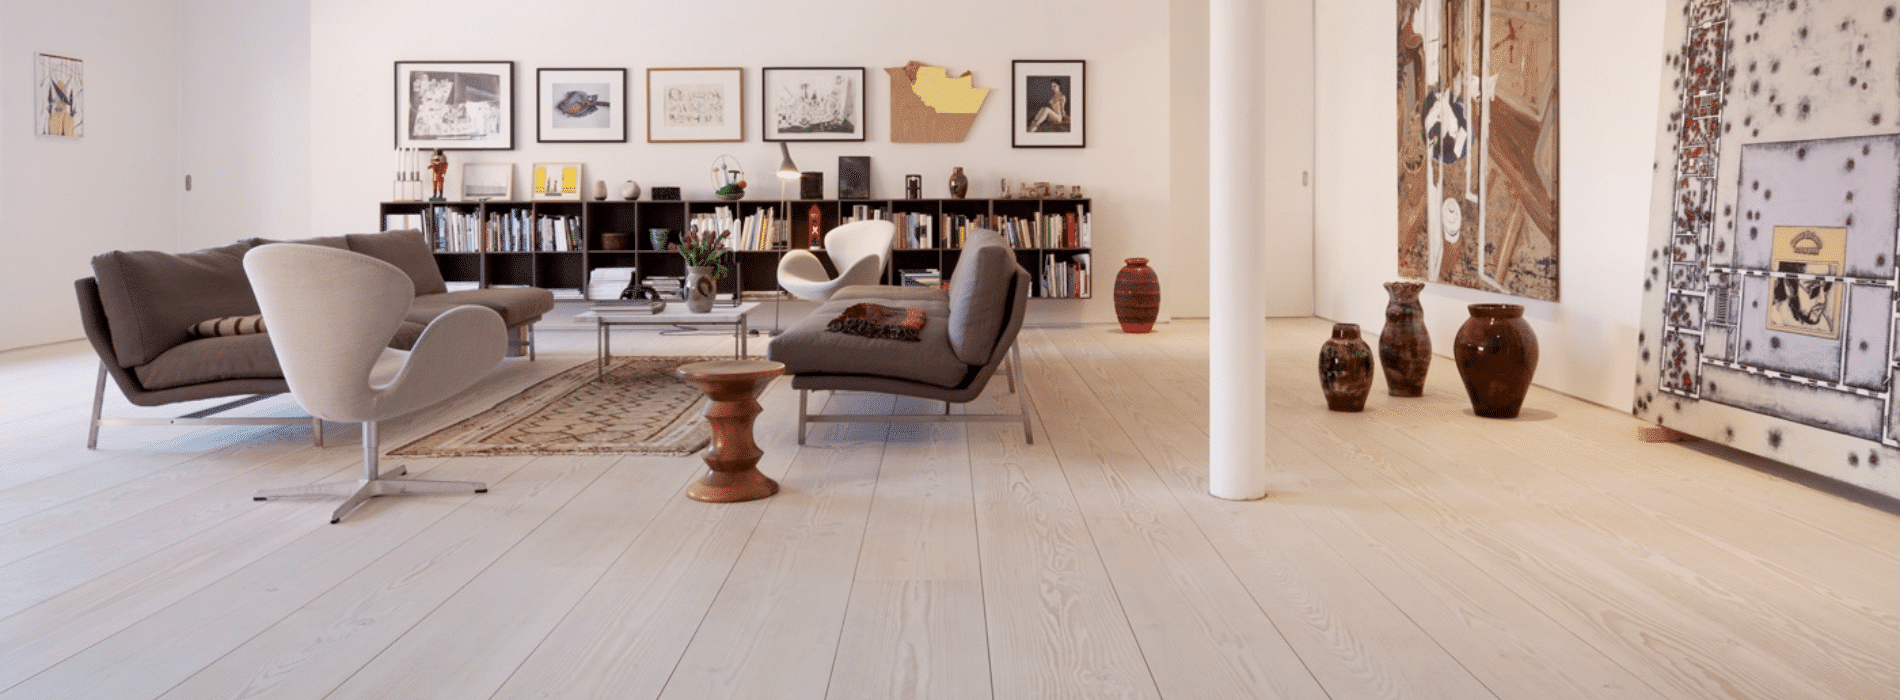 Restored engineered oak floors by Mr Sander® in Tulse Hill, SW2 with Junckers Strong satin finish highlighting rich grain patterns.